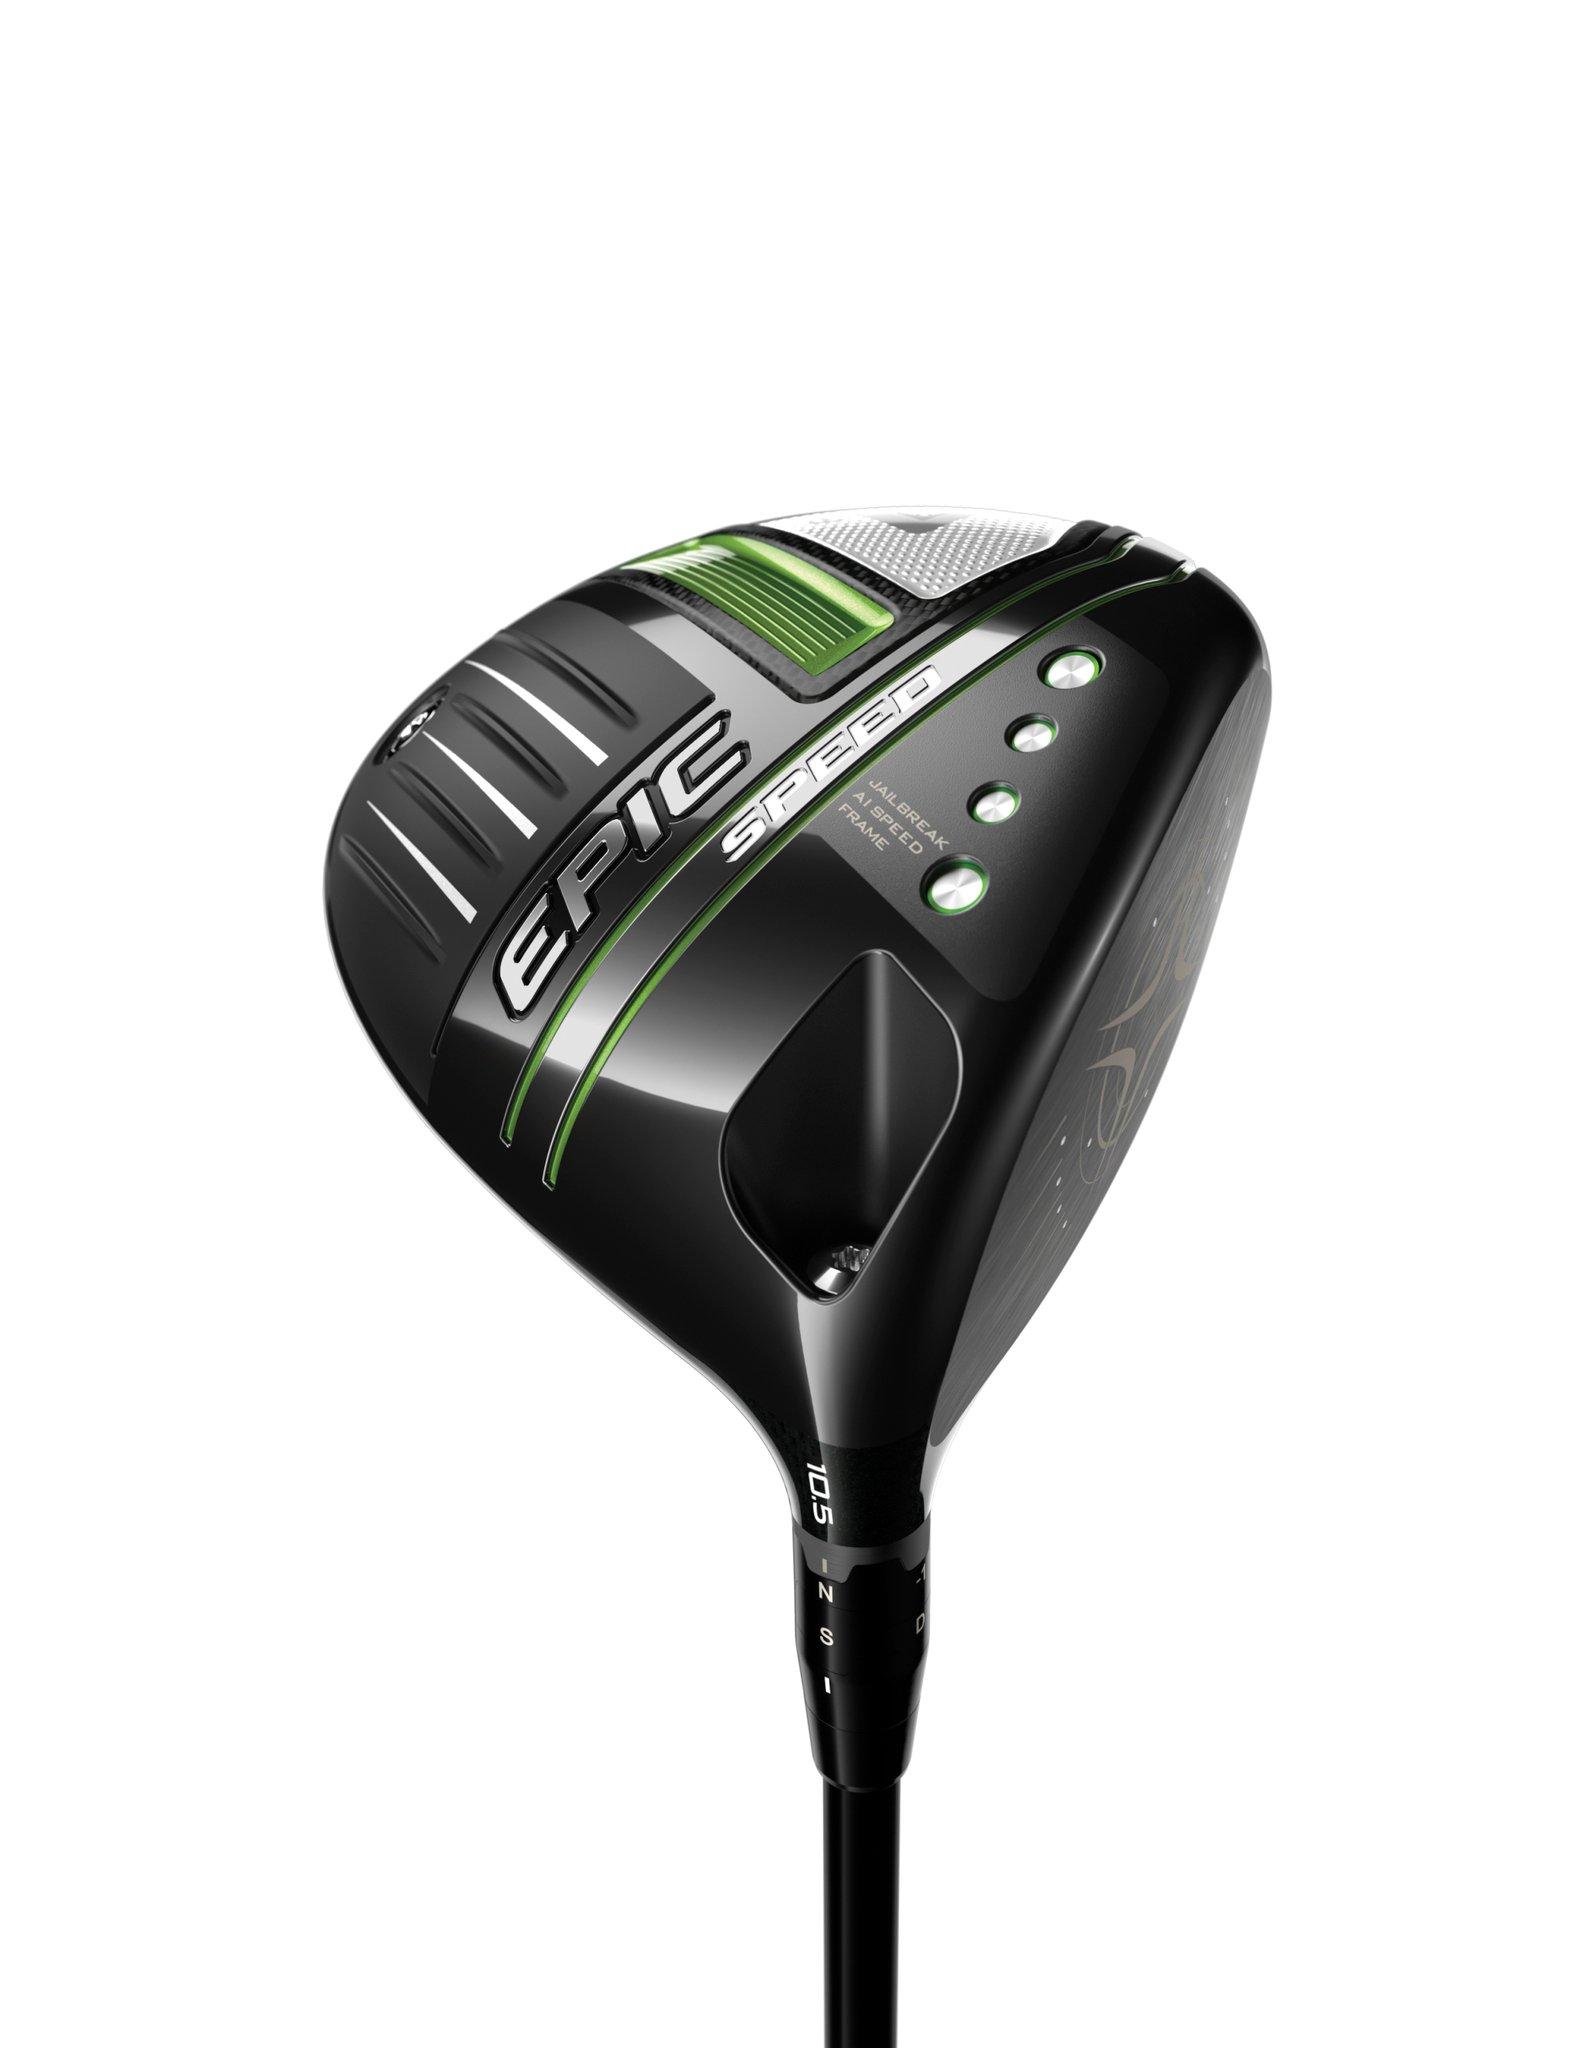 Epic Speed Driver | CALLAWAY | Golf Town Limited